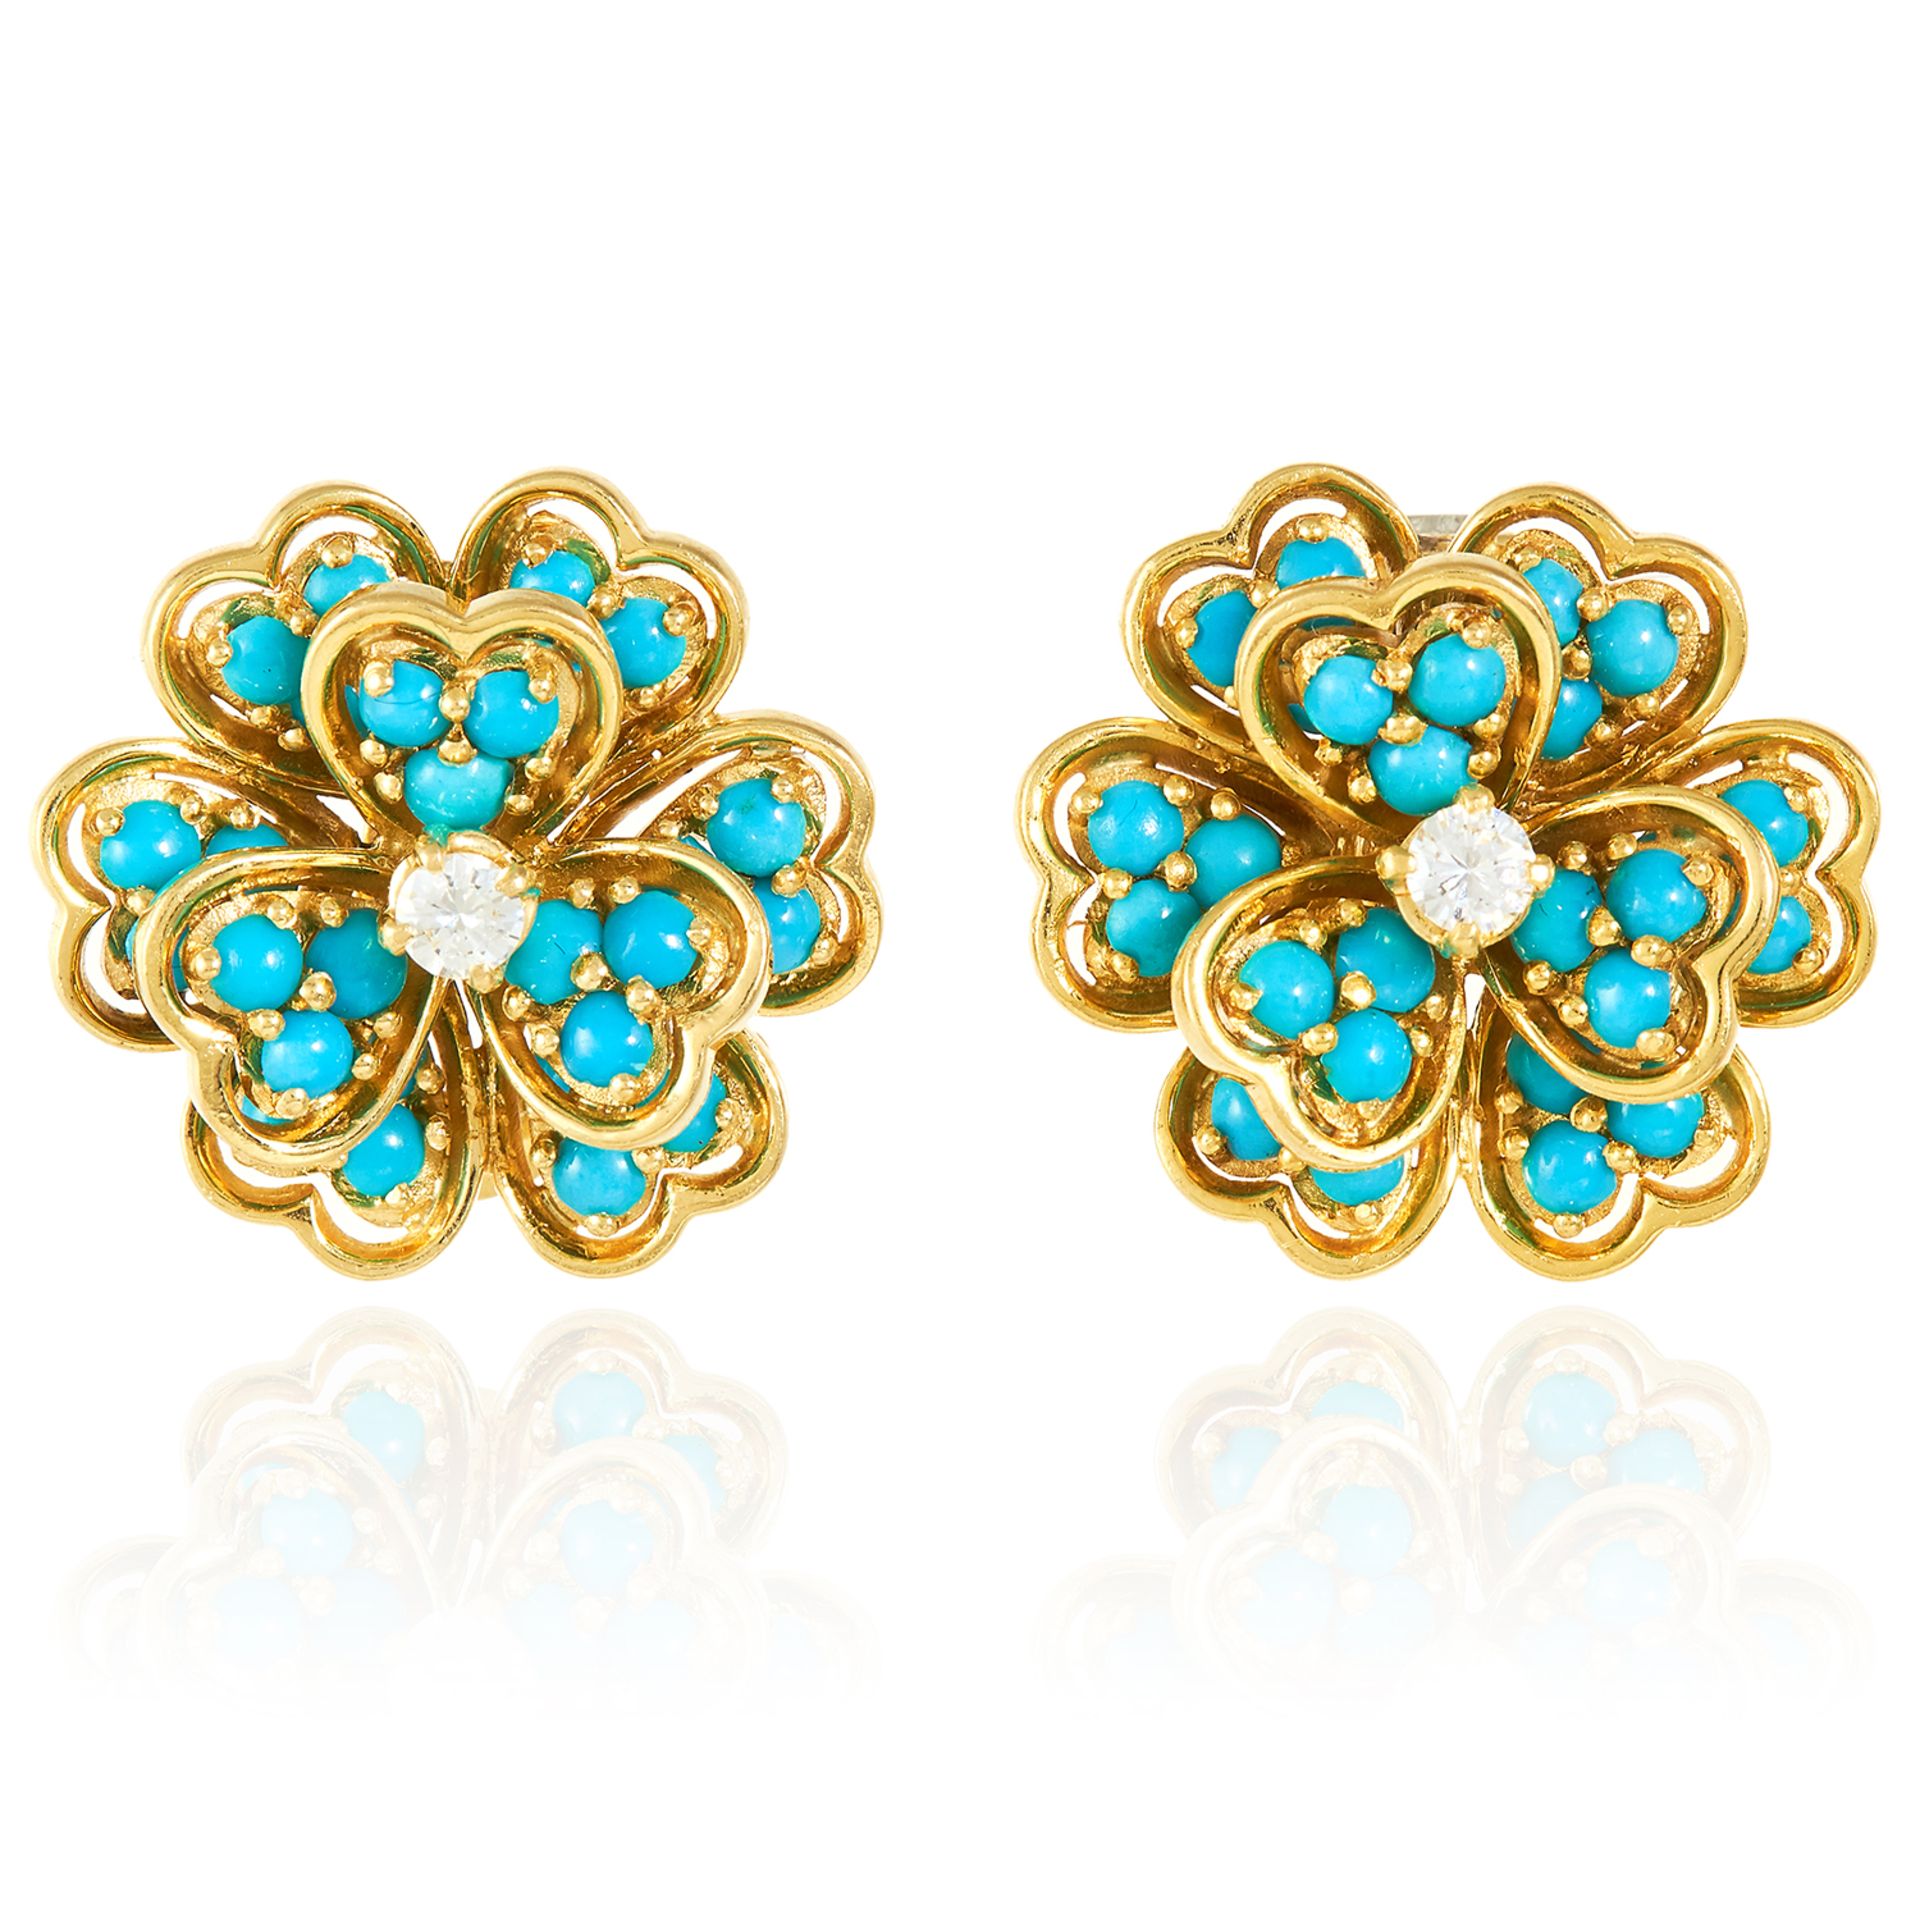 A PAIR OF TURQUOISE AND DIAMOND CLIP EARRINGS, BEN ROSENFELD 1963 in 18ct yellow gold, each designed